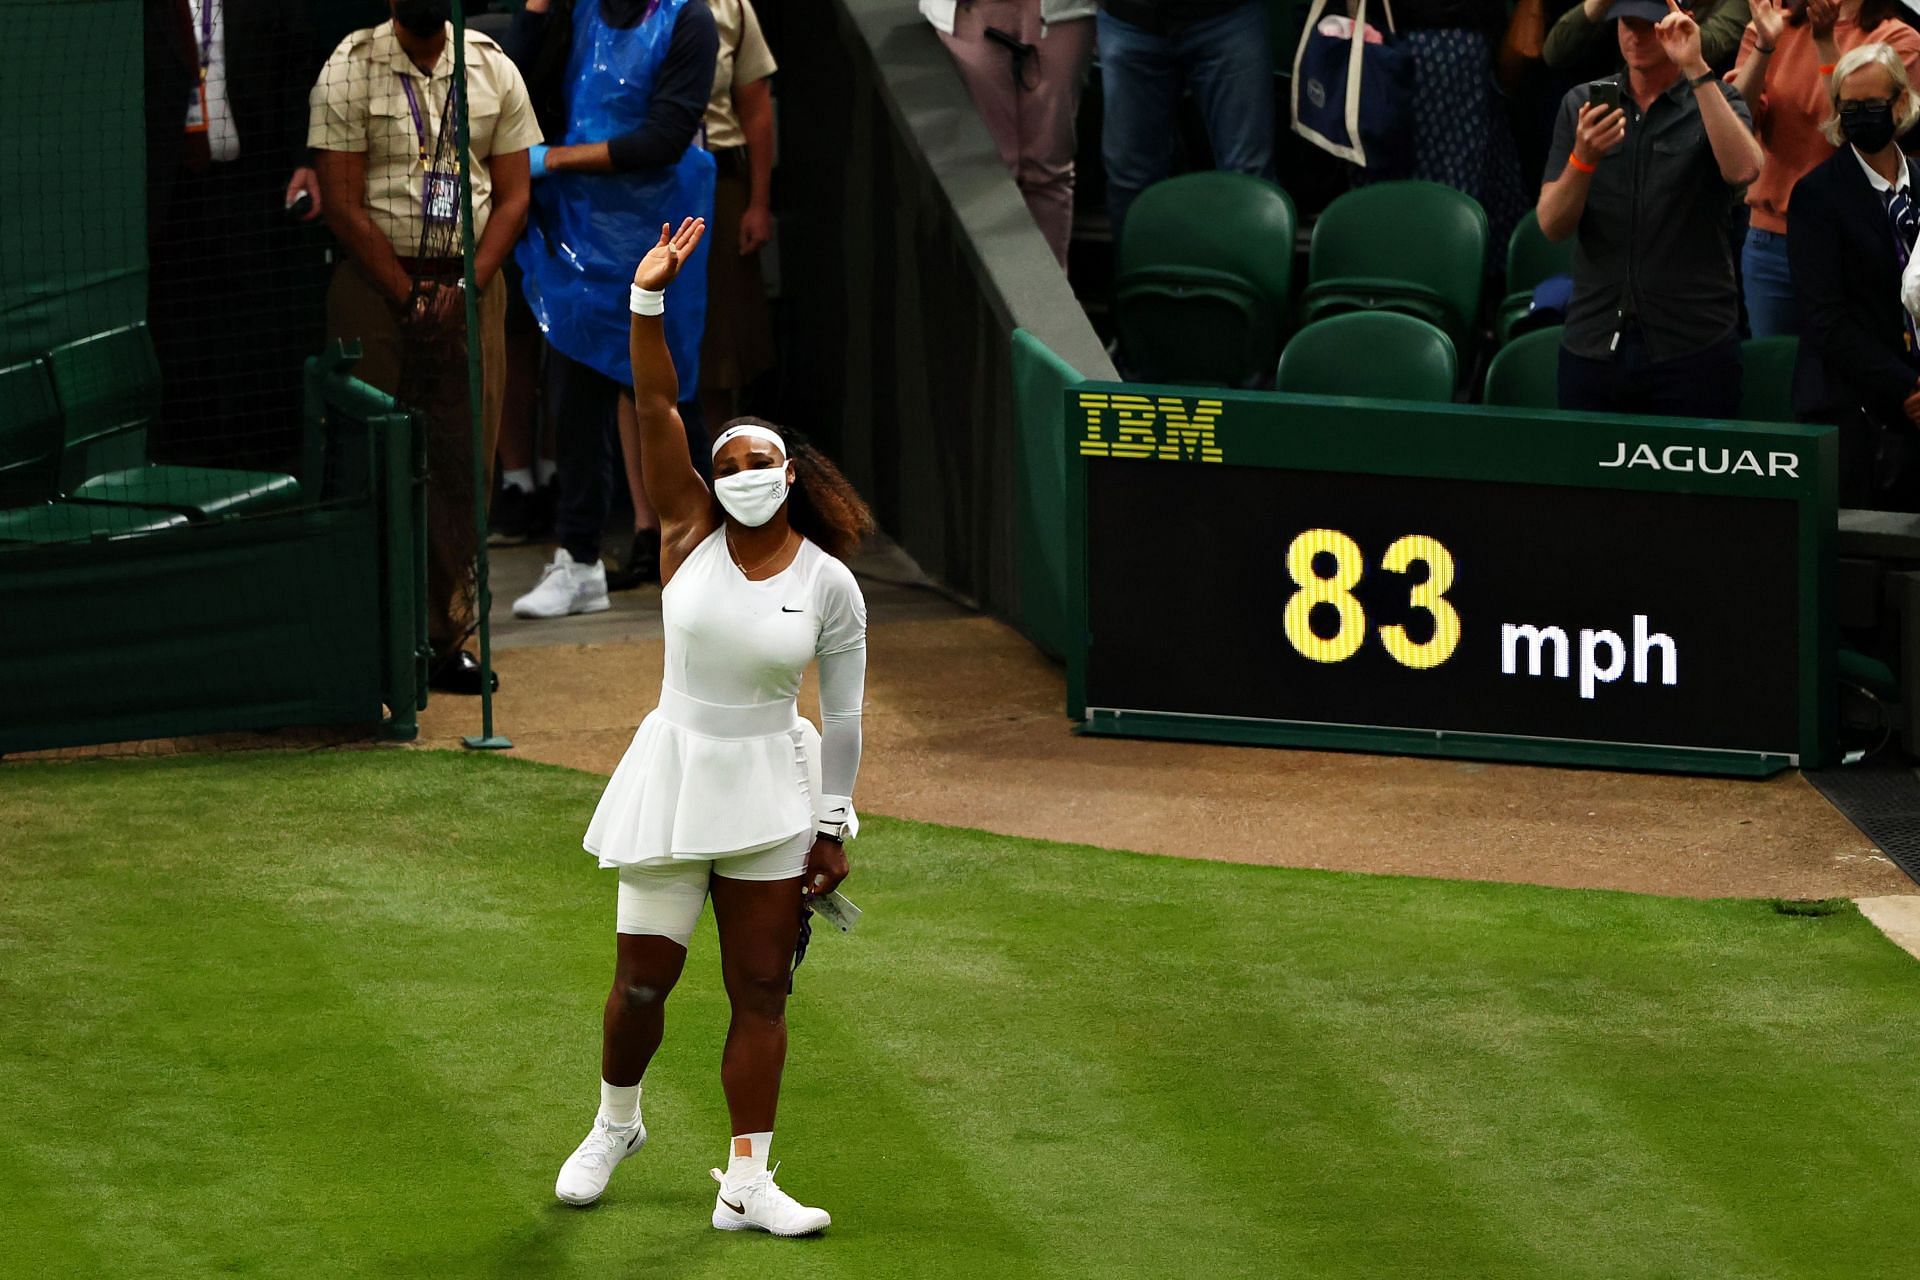 Serena Williams had retired in her first-round match at Wimbledon 2021 due to a hamstring injury